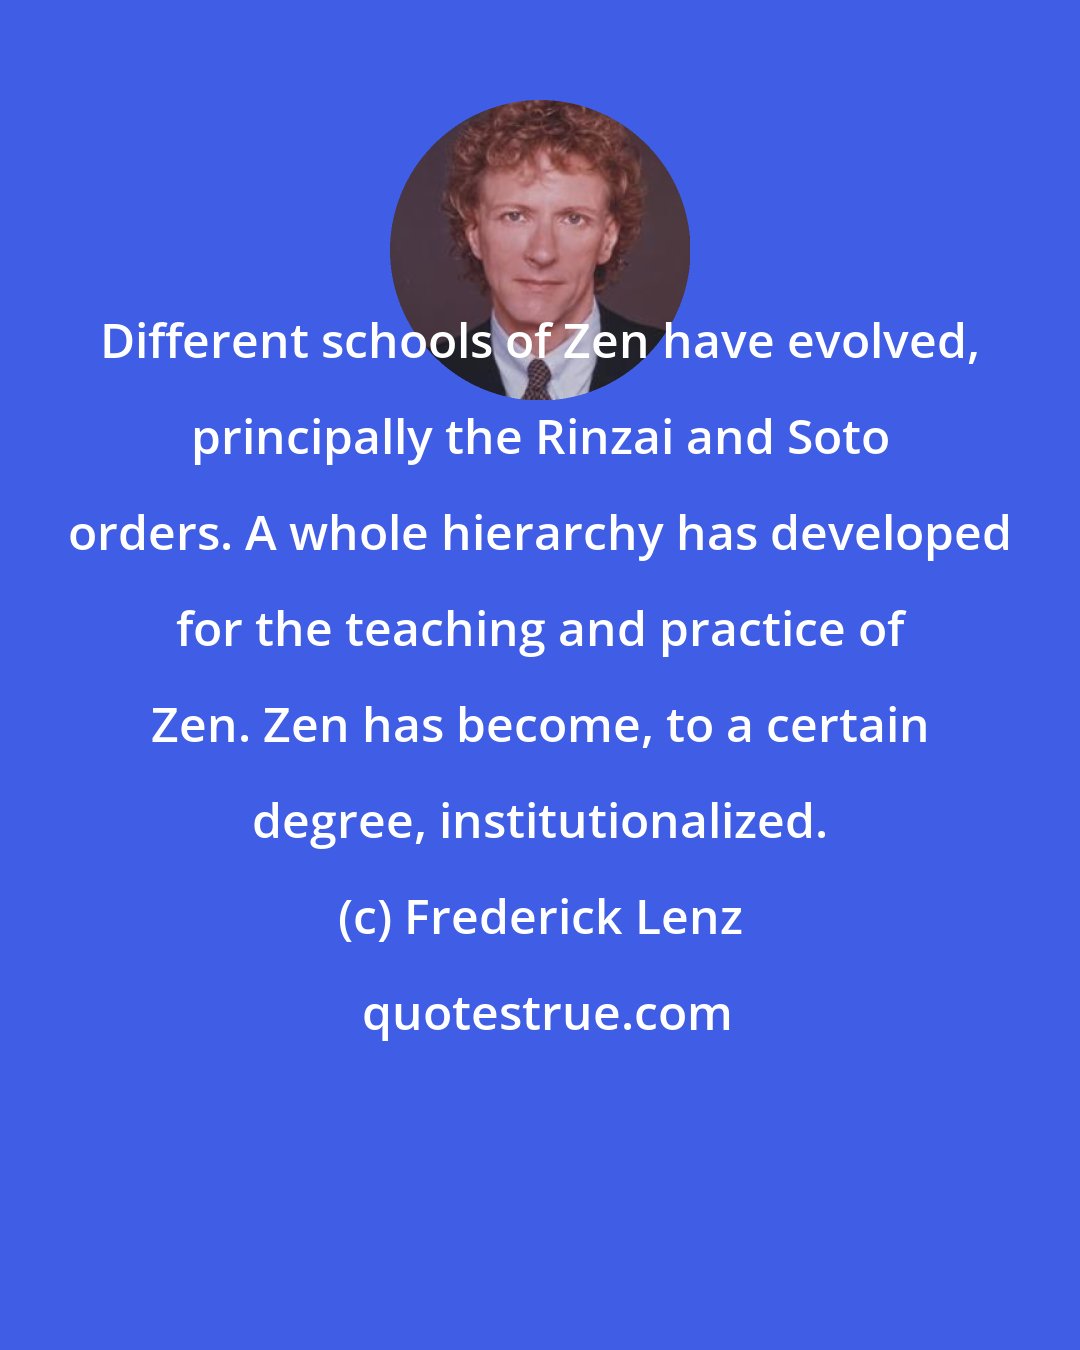 Frederick Lenz: Different schools of Zen have evolved, principally the Rinzai and Soto orders. A whole hierarchy has developed for the teaching and practice of Zen. Zen has become, to a certain degree, institutionalized.